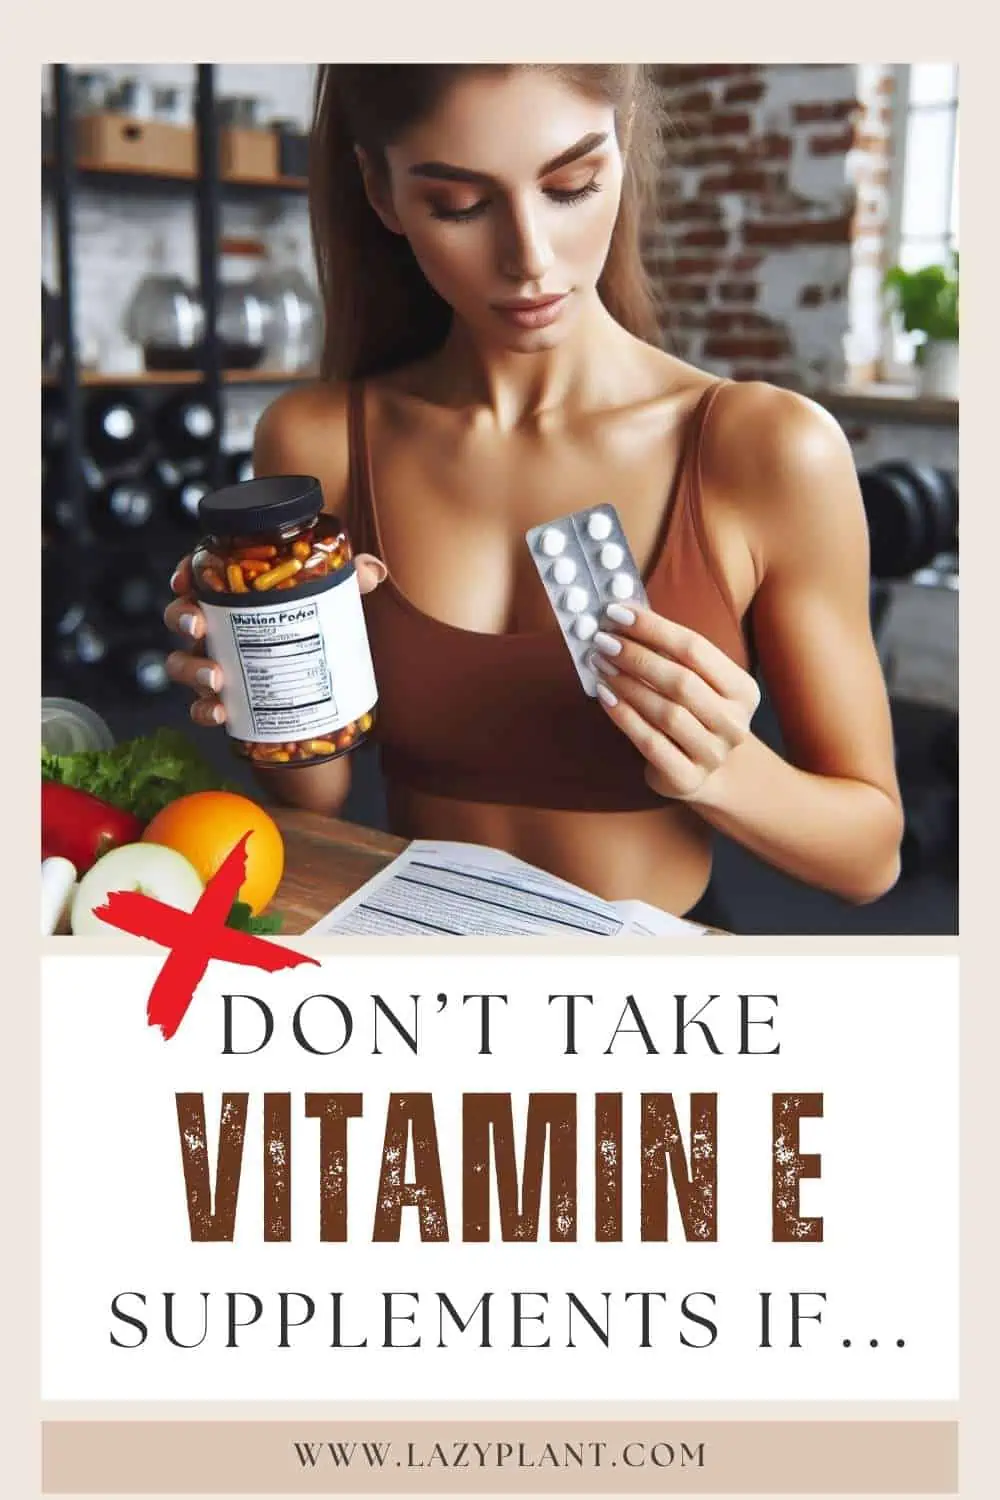 Is it safe to take 400 IU of vitamin E from supplements every day?